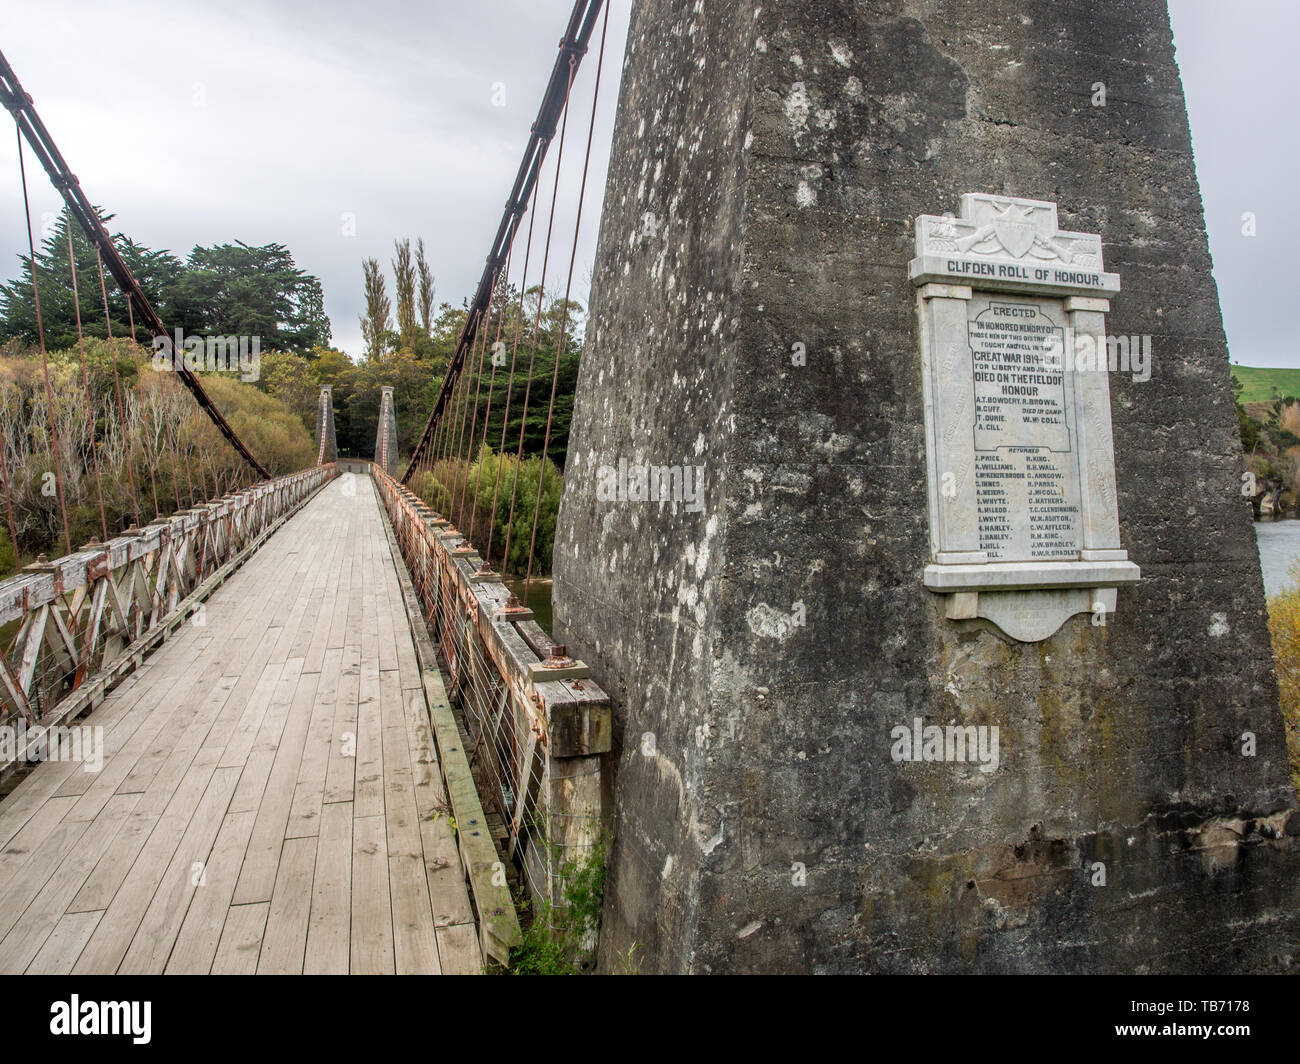 Clifden Suspension Bridge and Clifden Roll of Honour, commemorating men from the district who gave their lives in World War 1, Southland, New Zealand Stock Photo